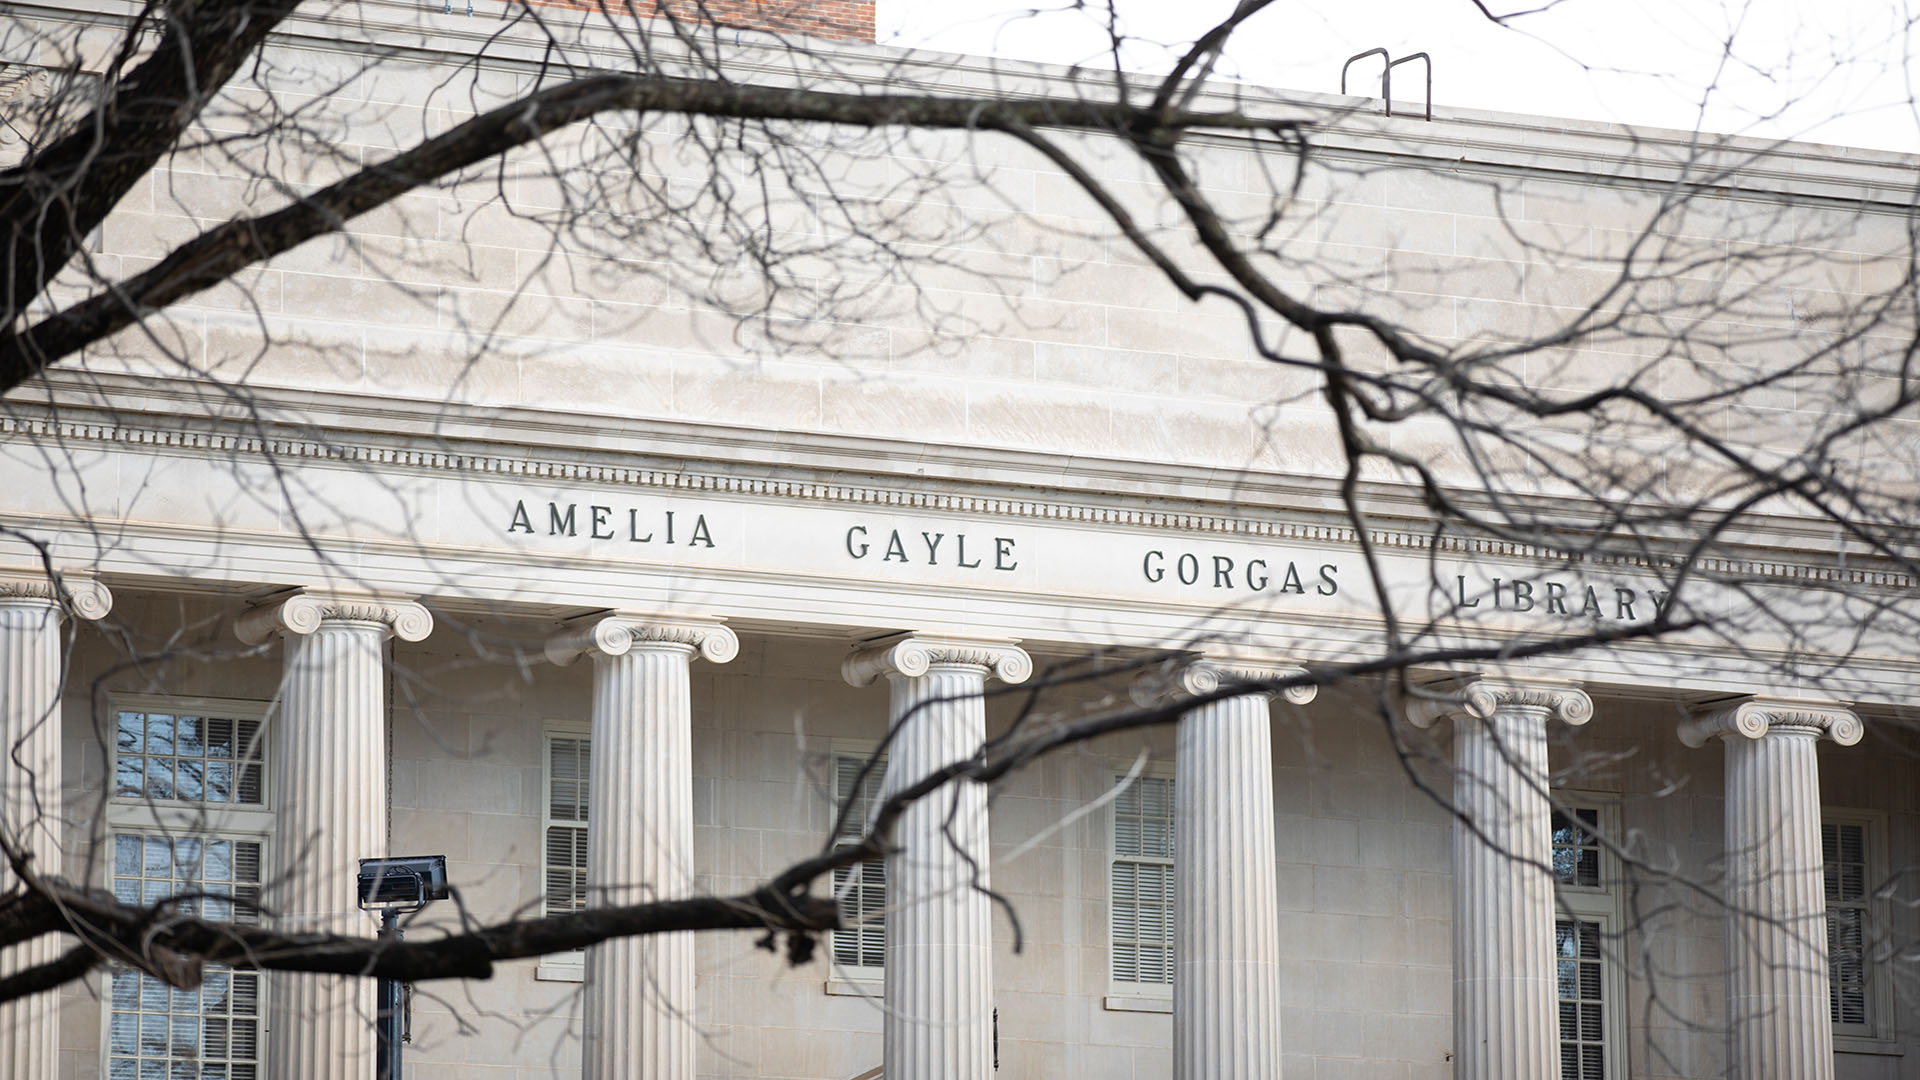 Close-up image of Gorgas Library